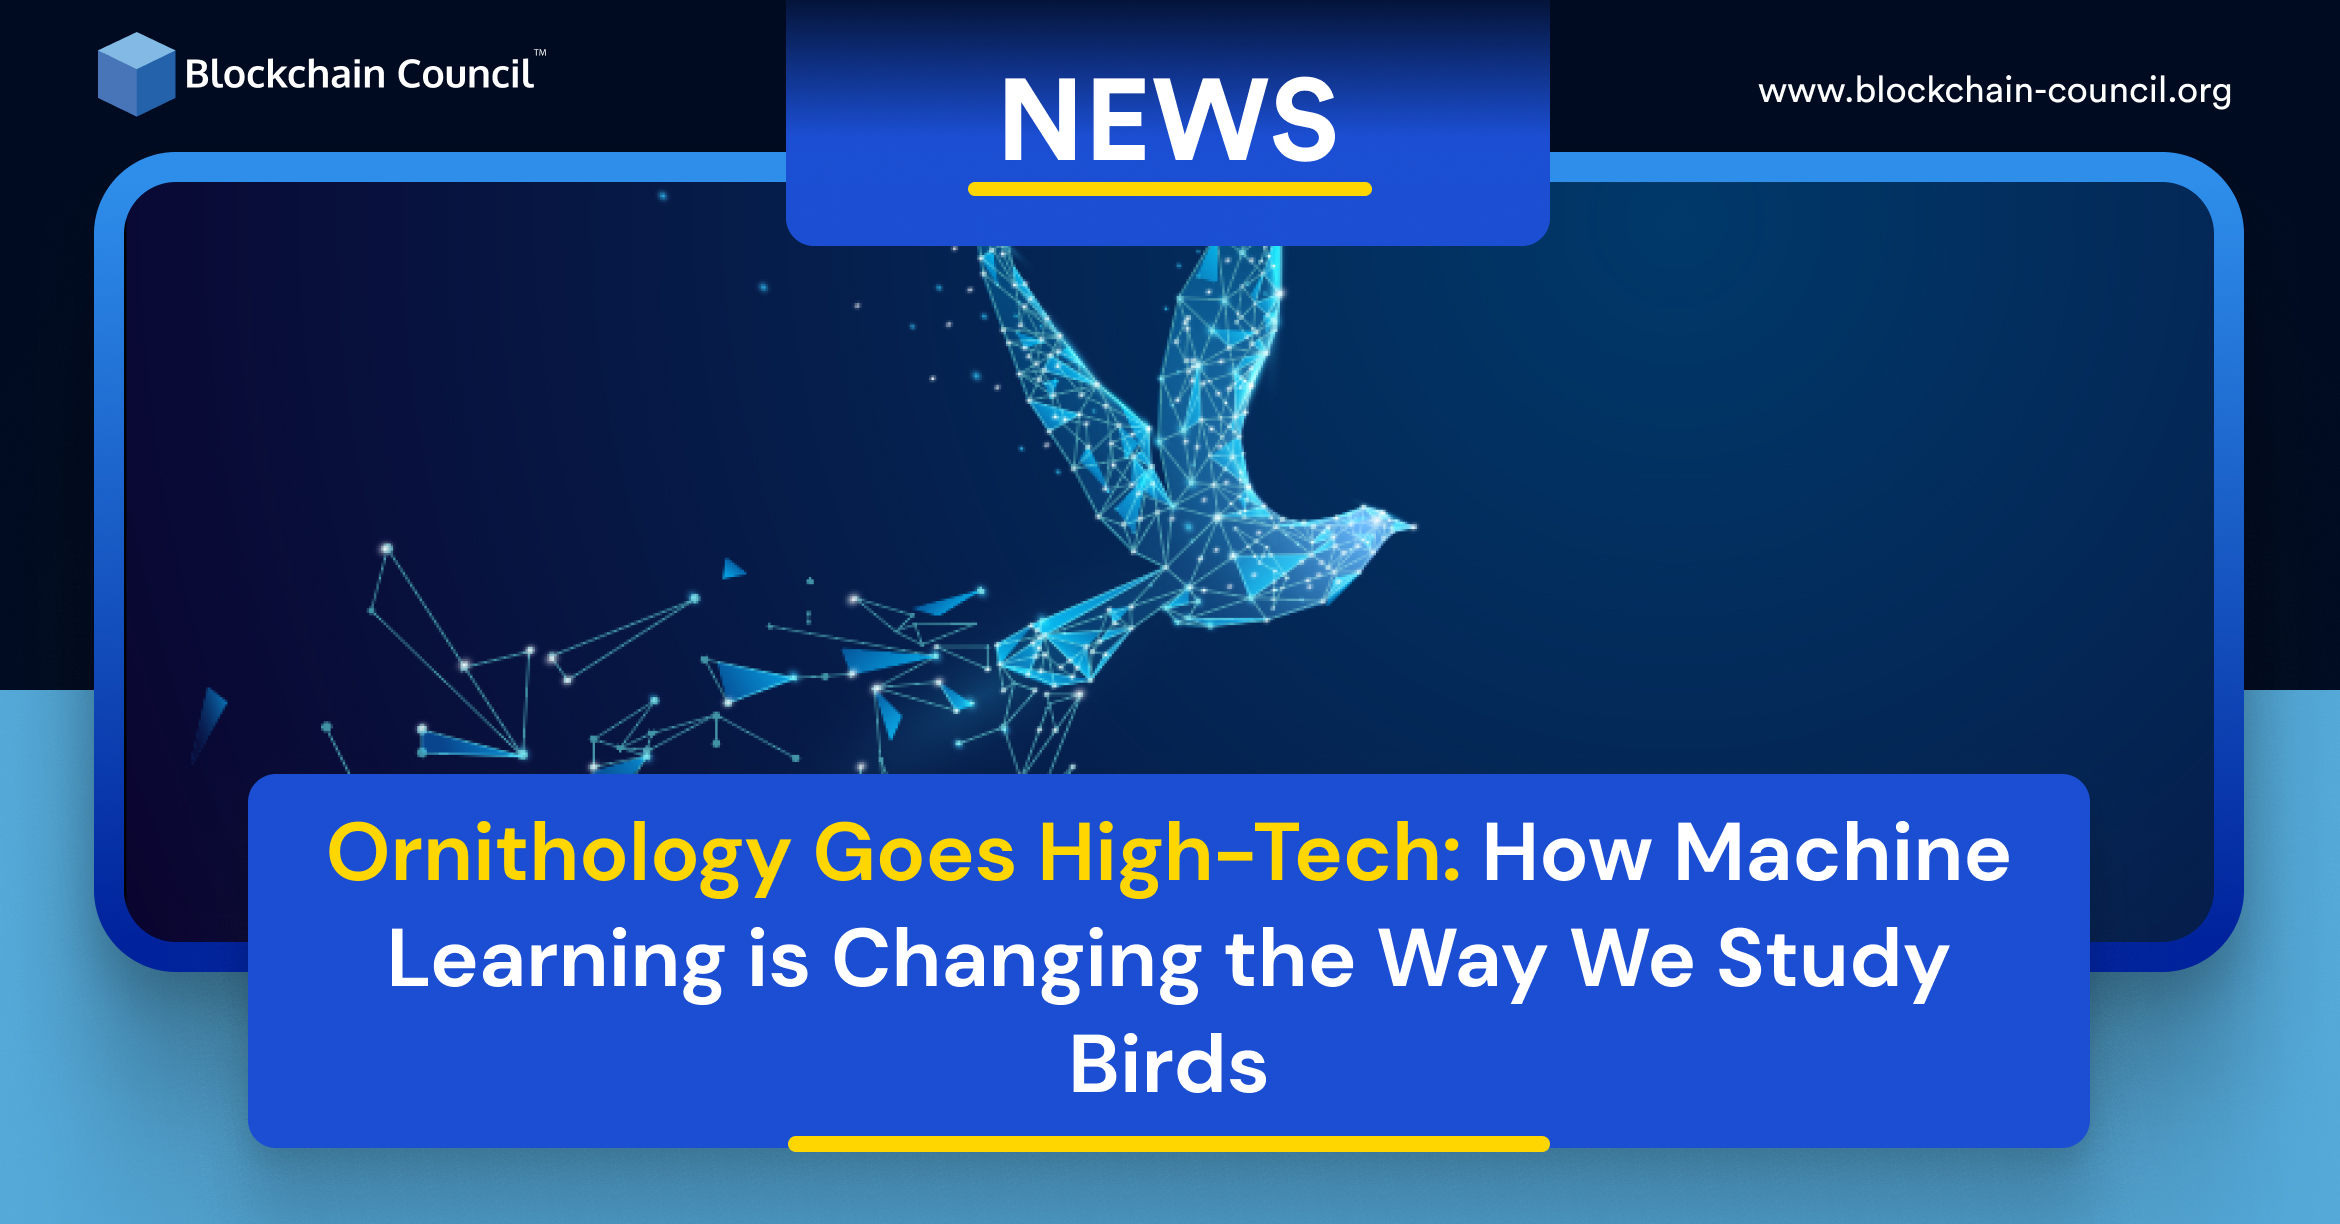 Ornithology Goes High-Tech: How Machine Learning is Changing the Way We Study Birds